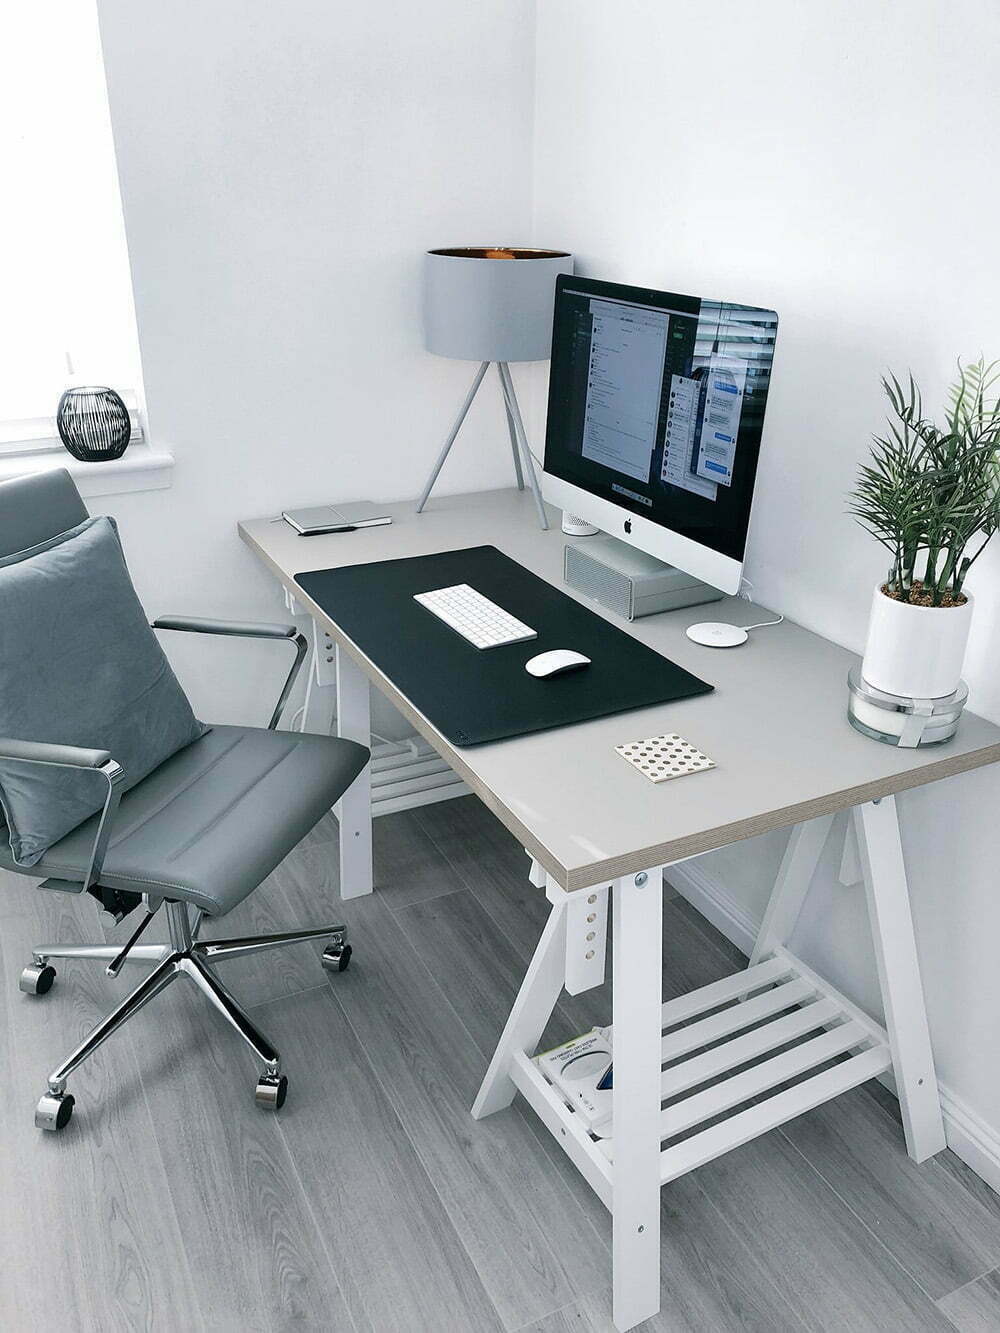 Top 10 Work From Home Office Setup Ideas